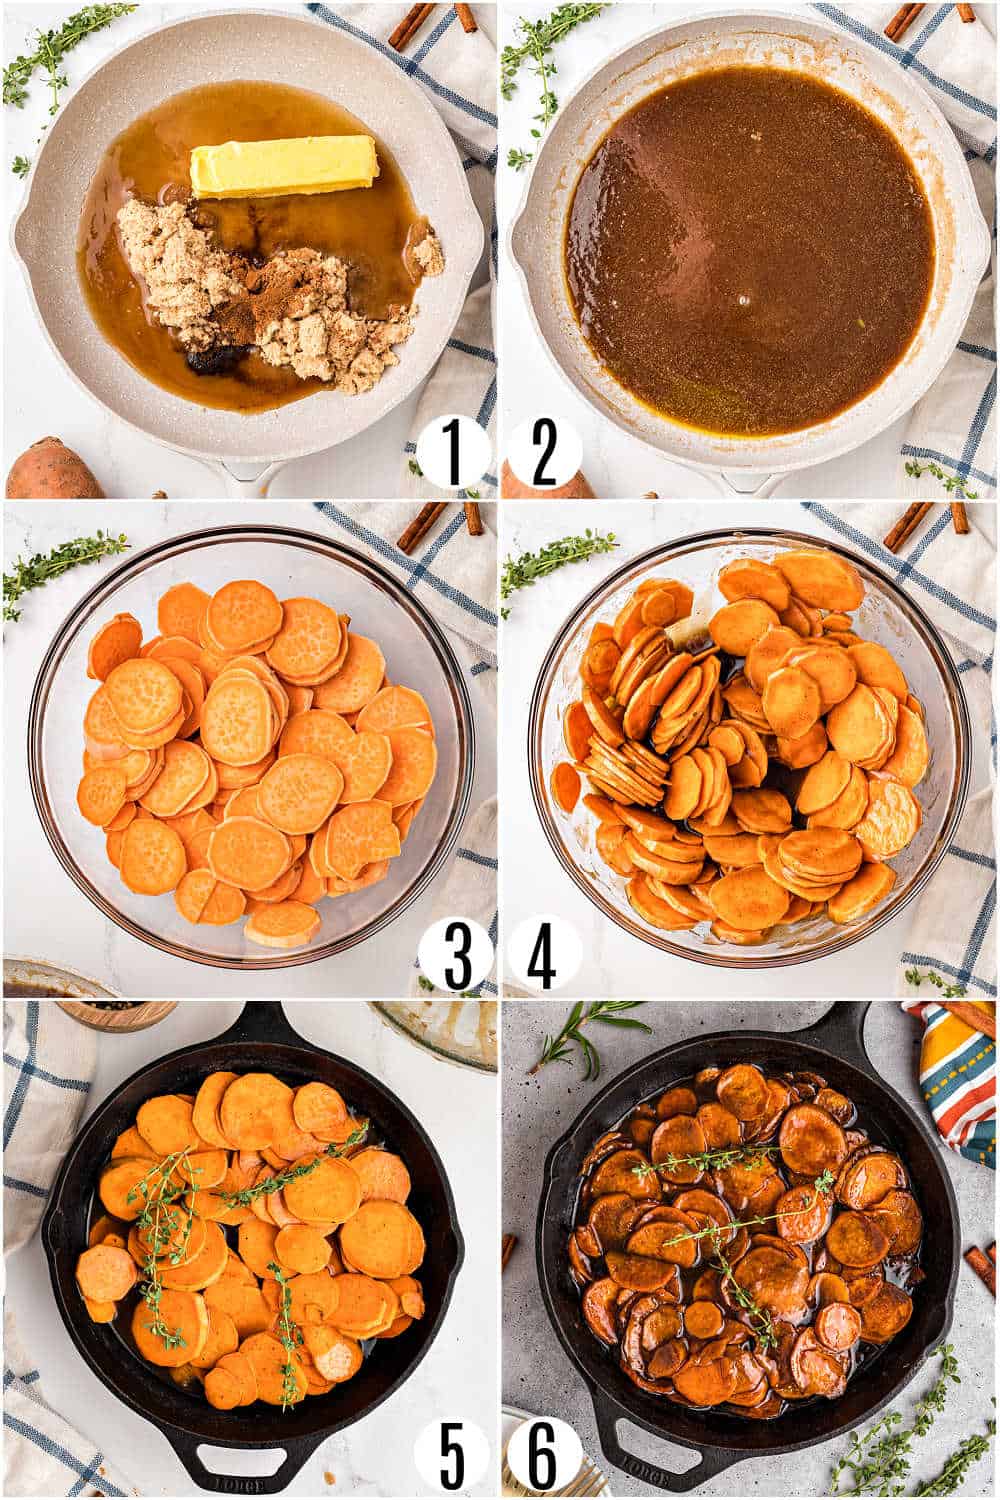 Step by step photos showing how to make candied sweet potatoes.